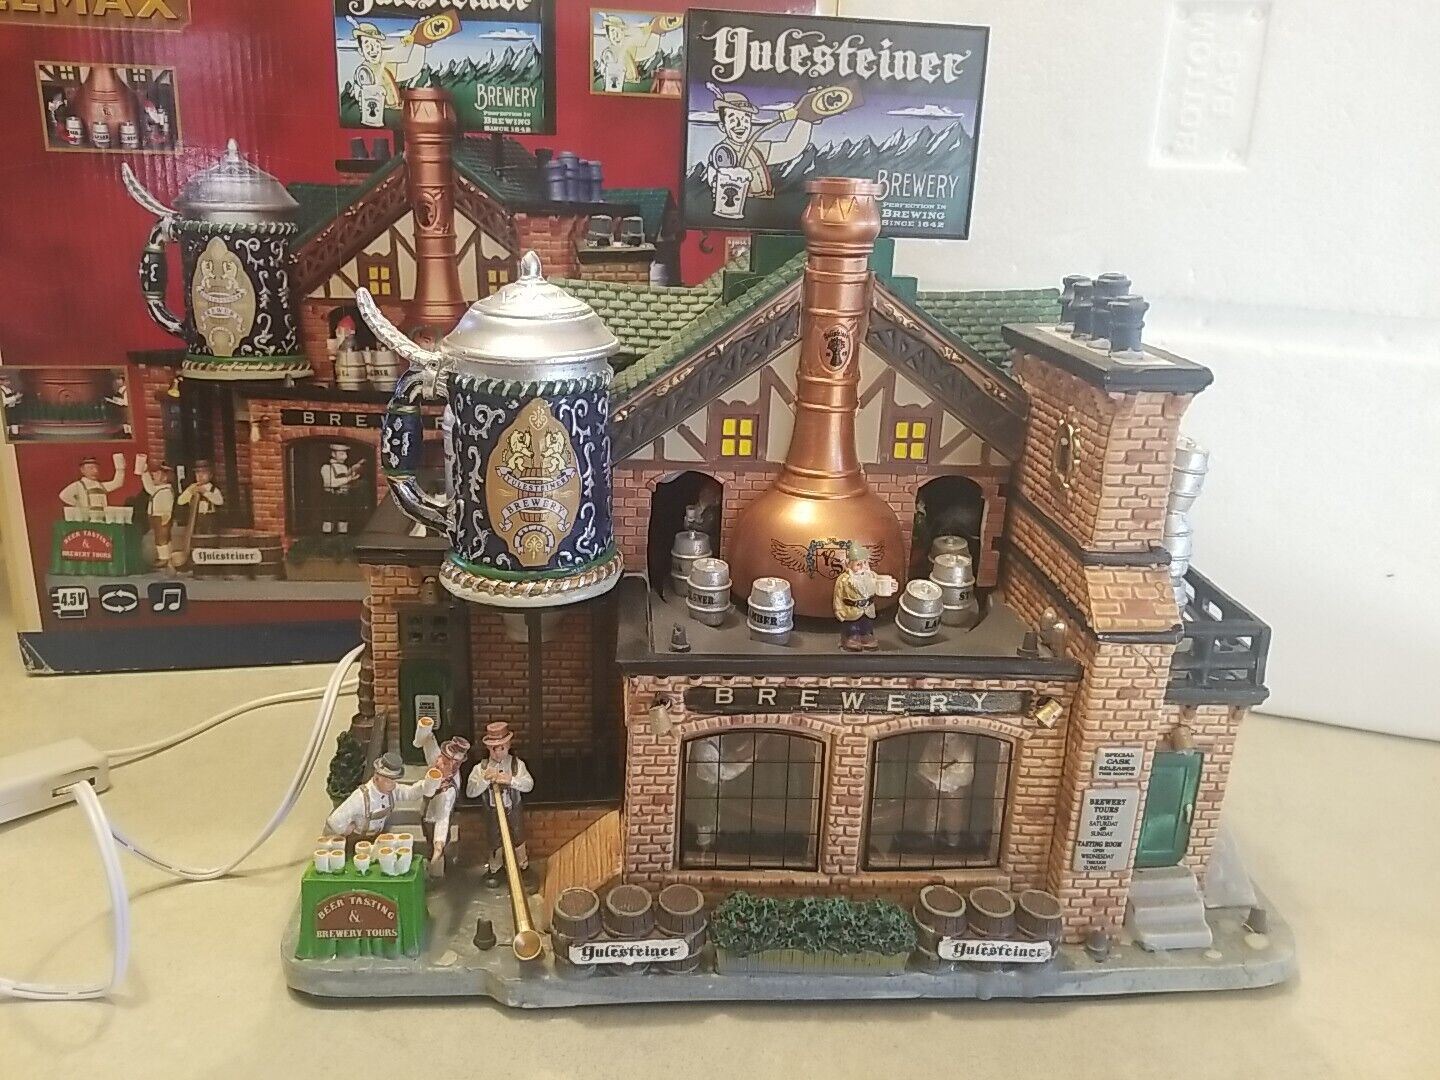 Lemax Christmas Village Yulesteiner Brewery With Box Read Description 